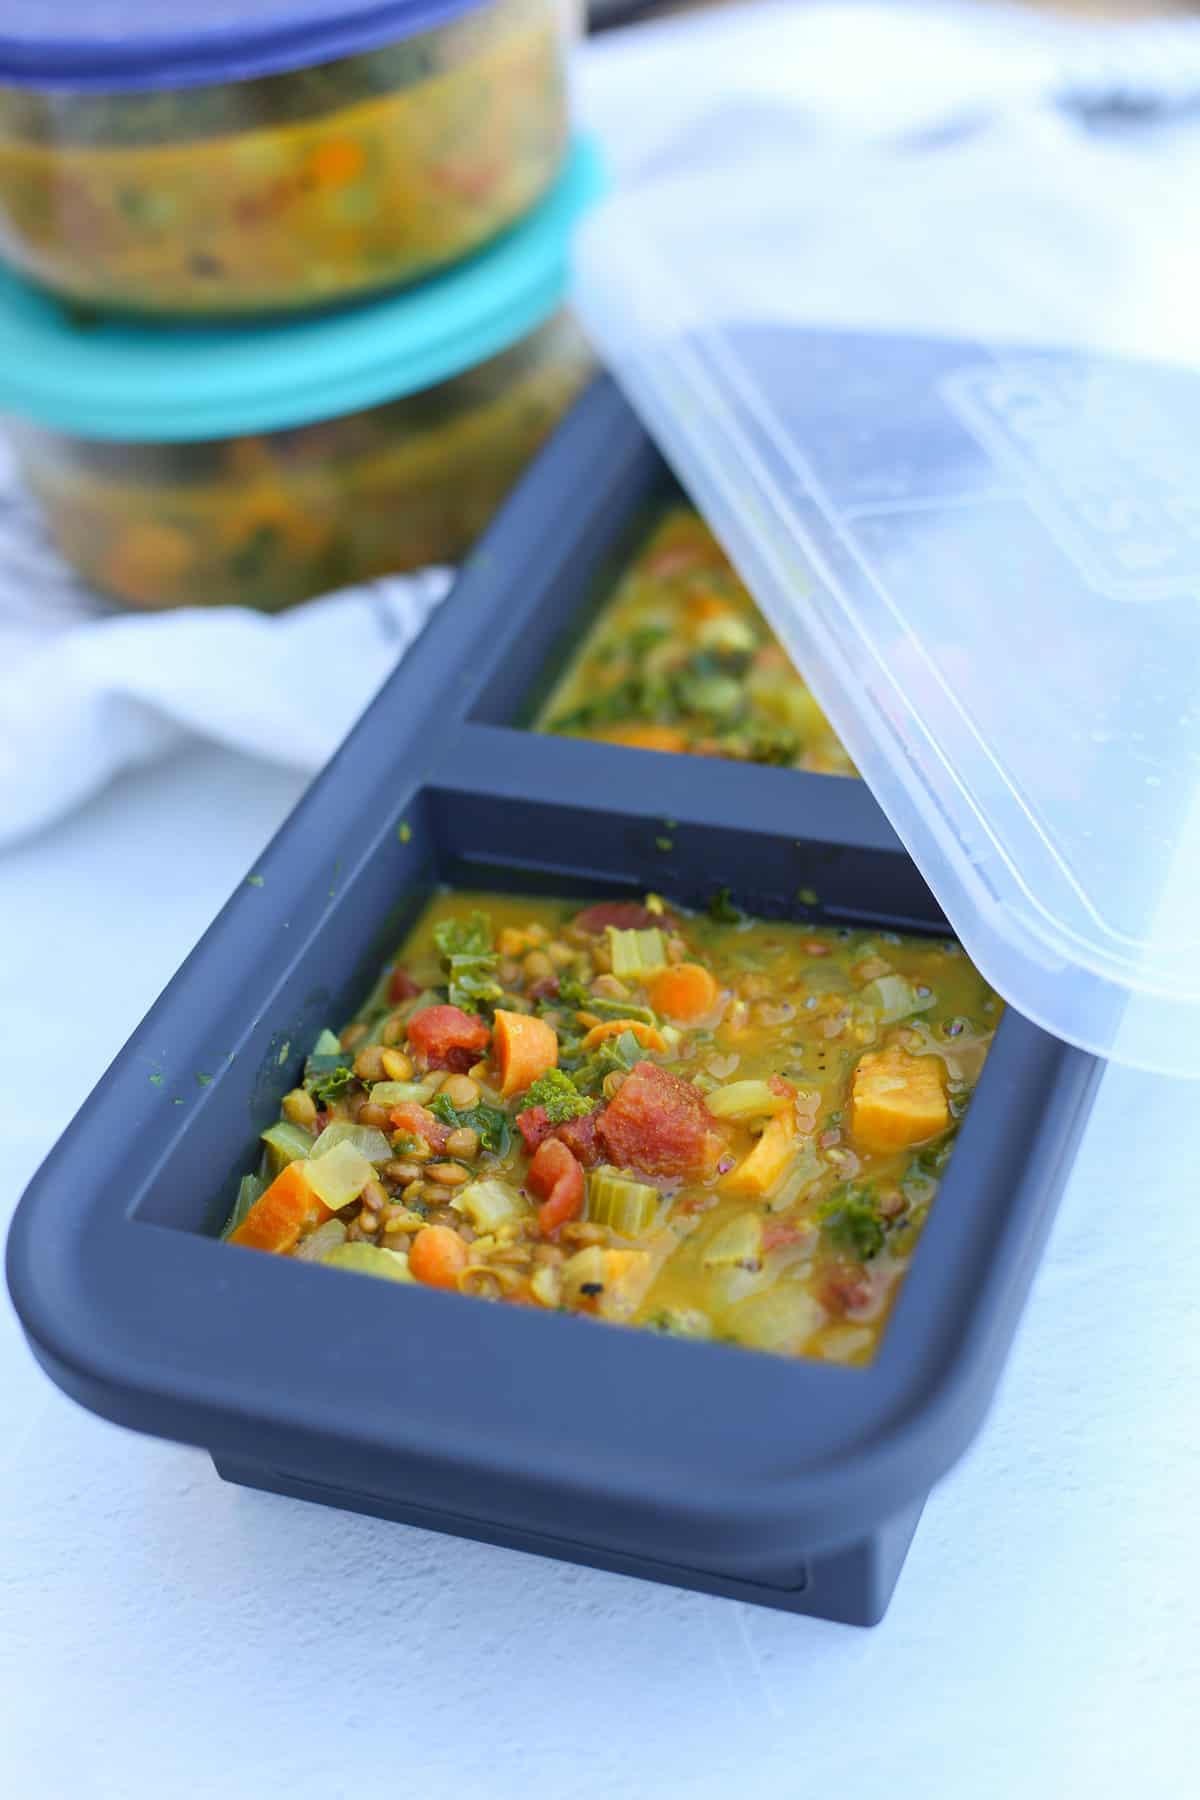 Coconut curry soup in Souper Cubes ready for the freezer.